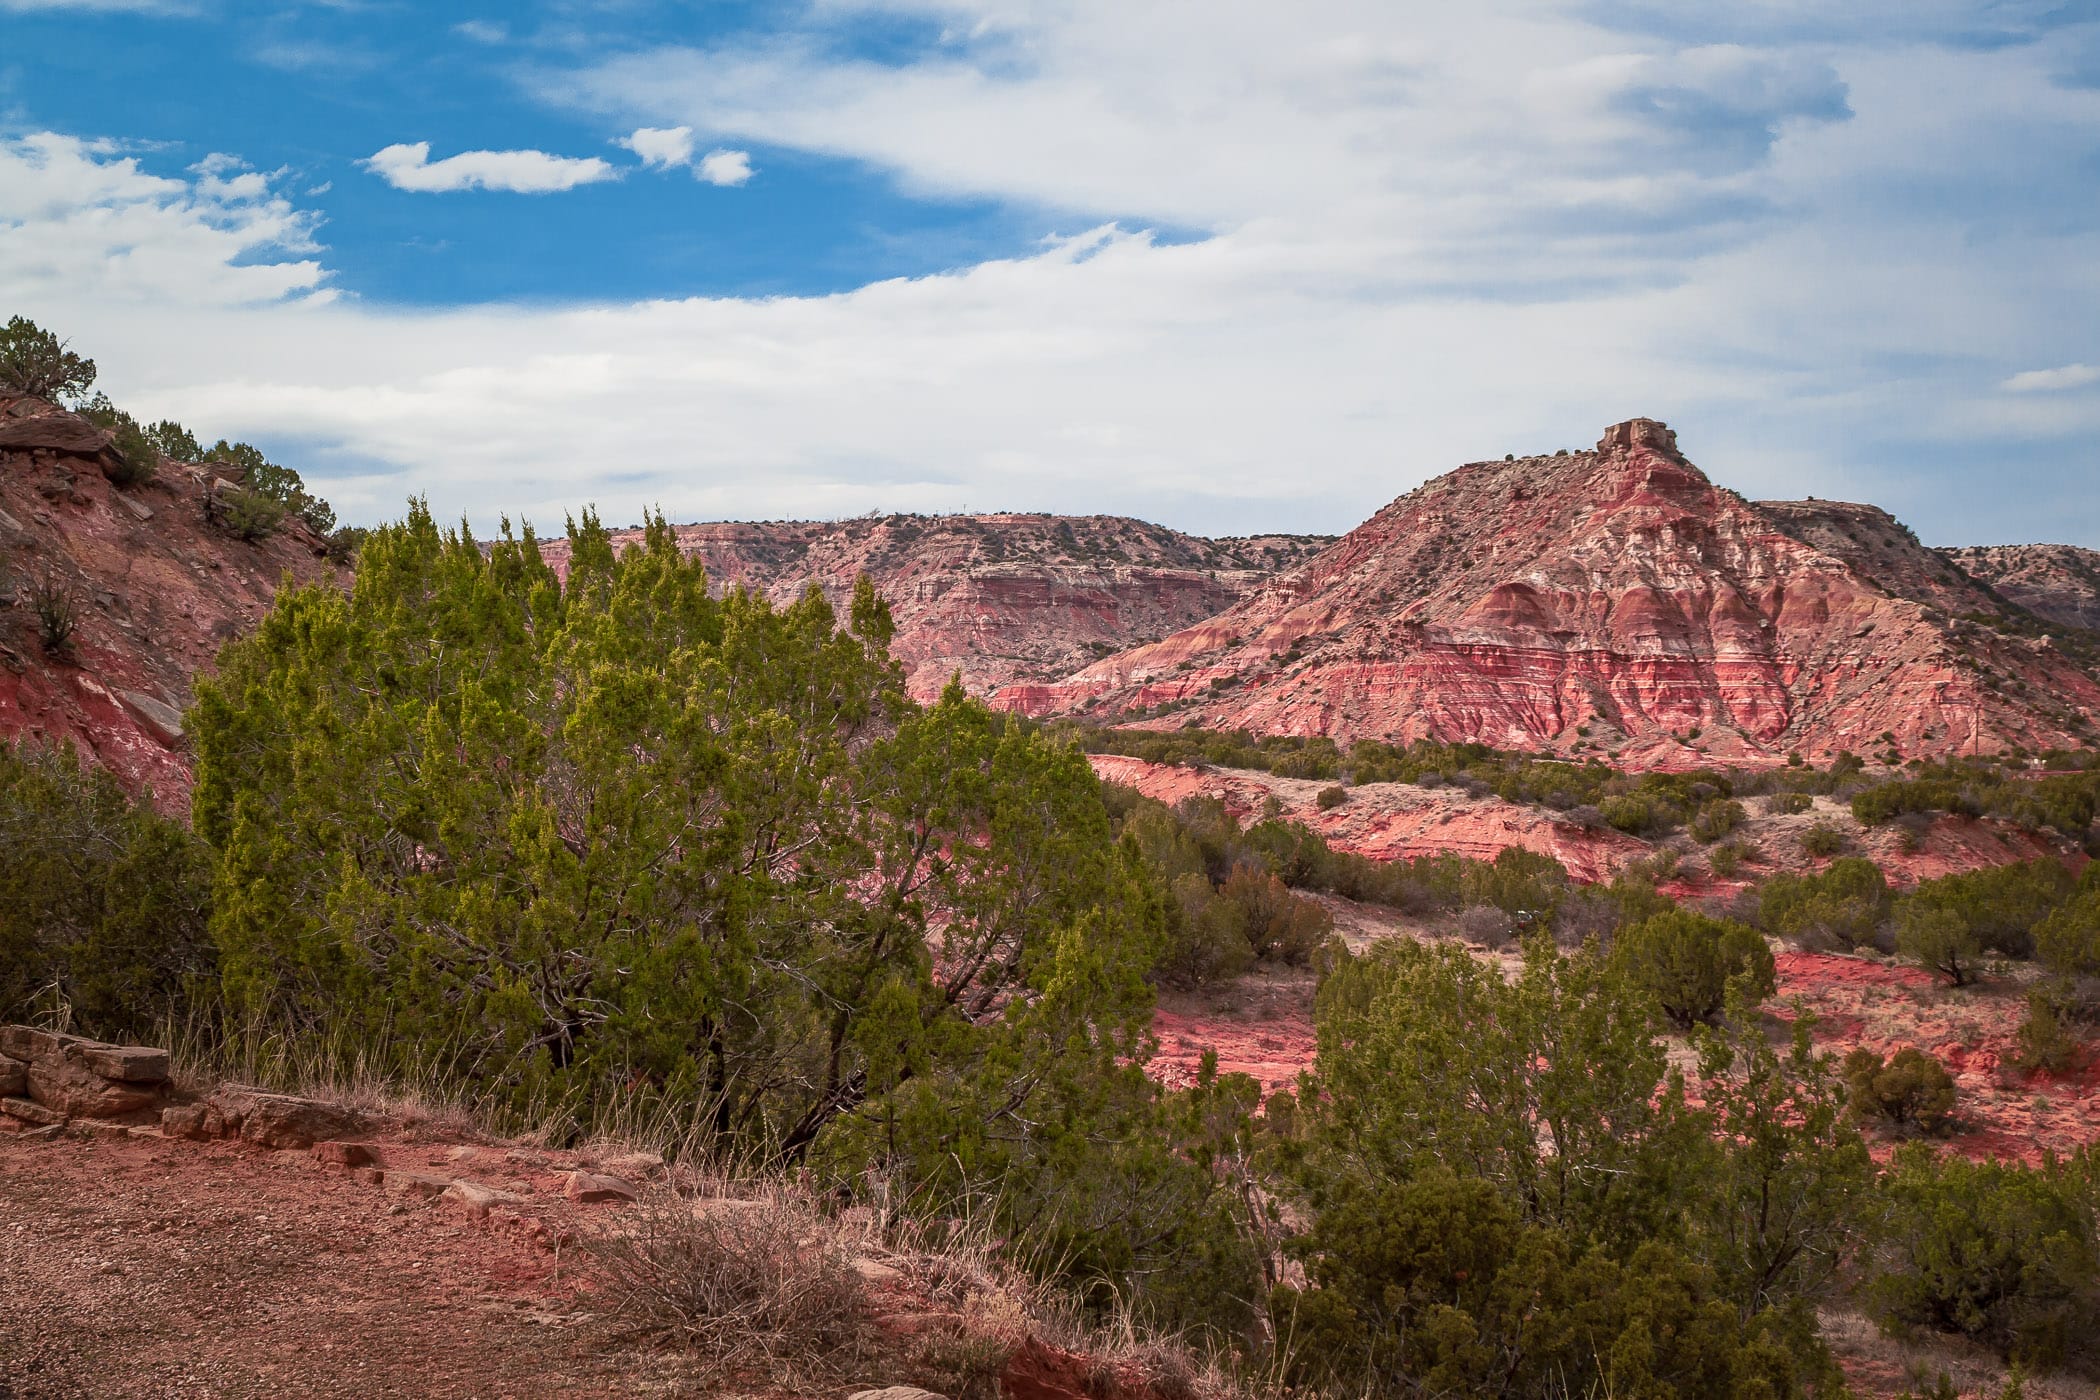 The rugged landscape of Palo Duro Canyon, Texas.